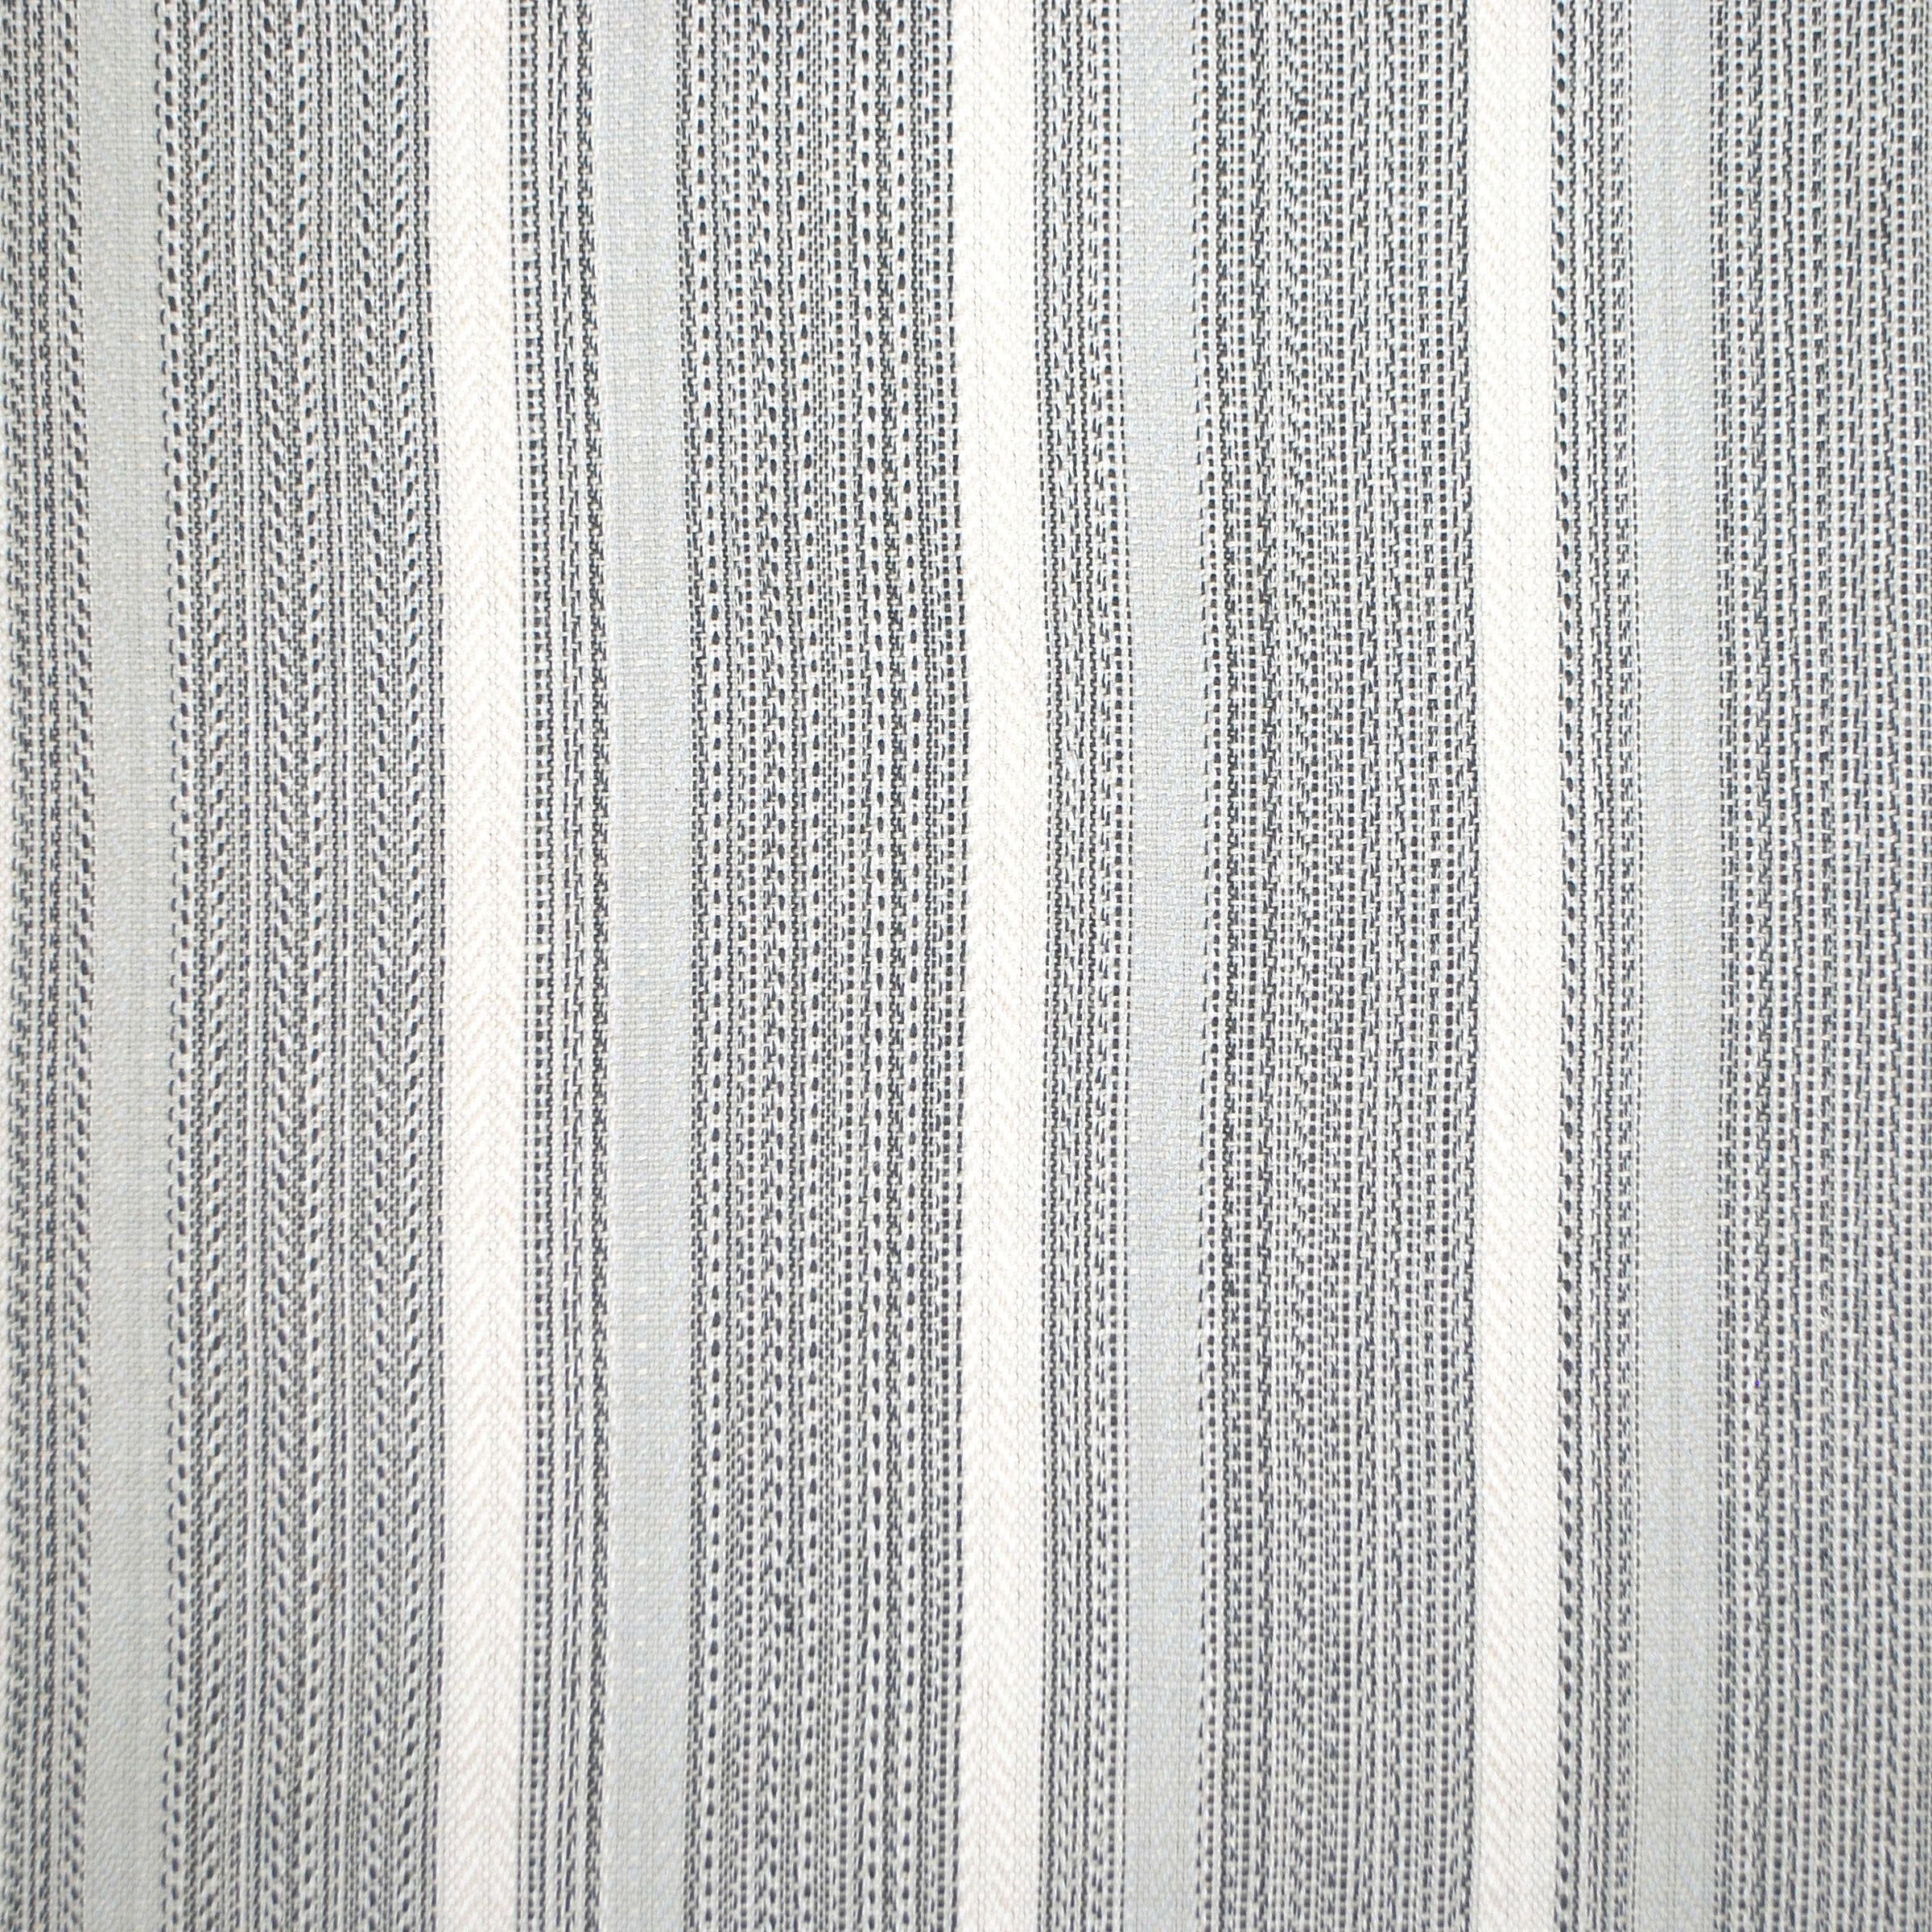 Winfield Hall fabric in pewter color - pattern number PQ 0002A400 - by Scalamandre in the Old World Weavers collection